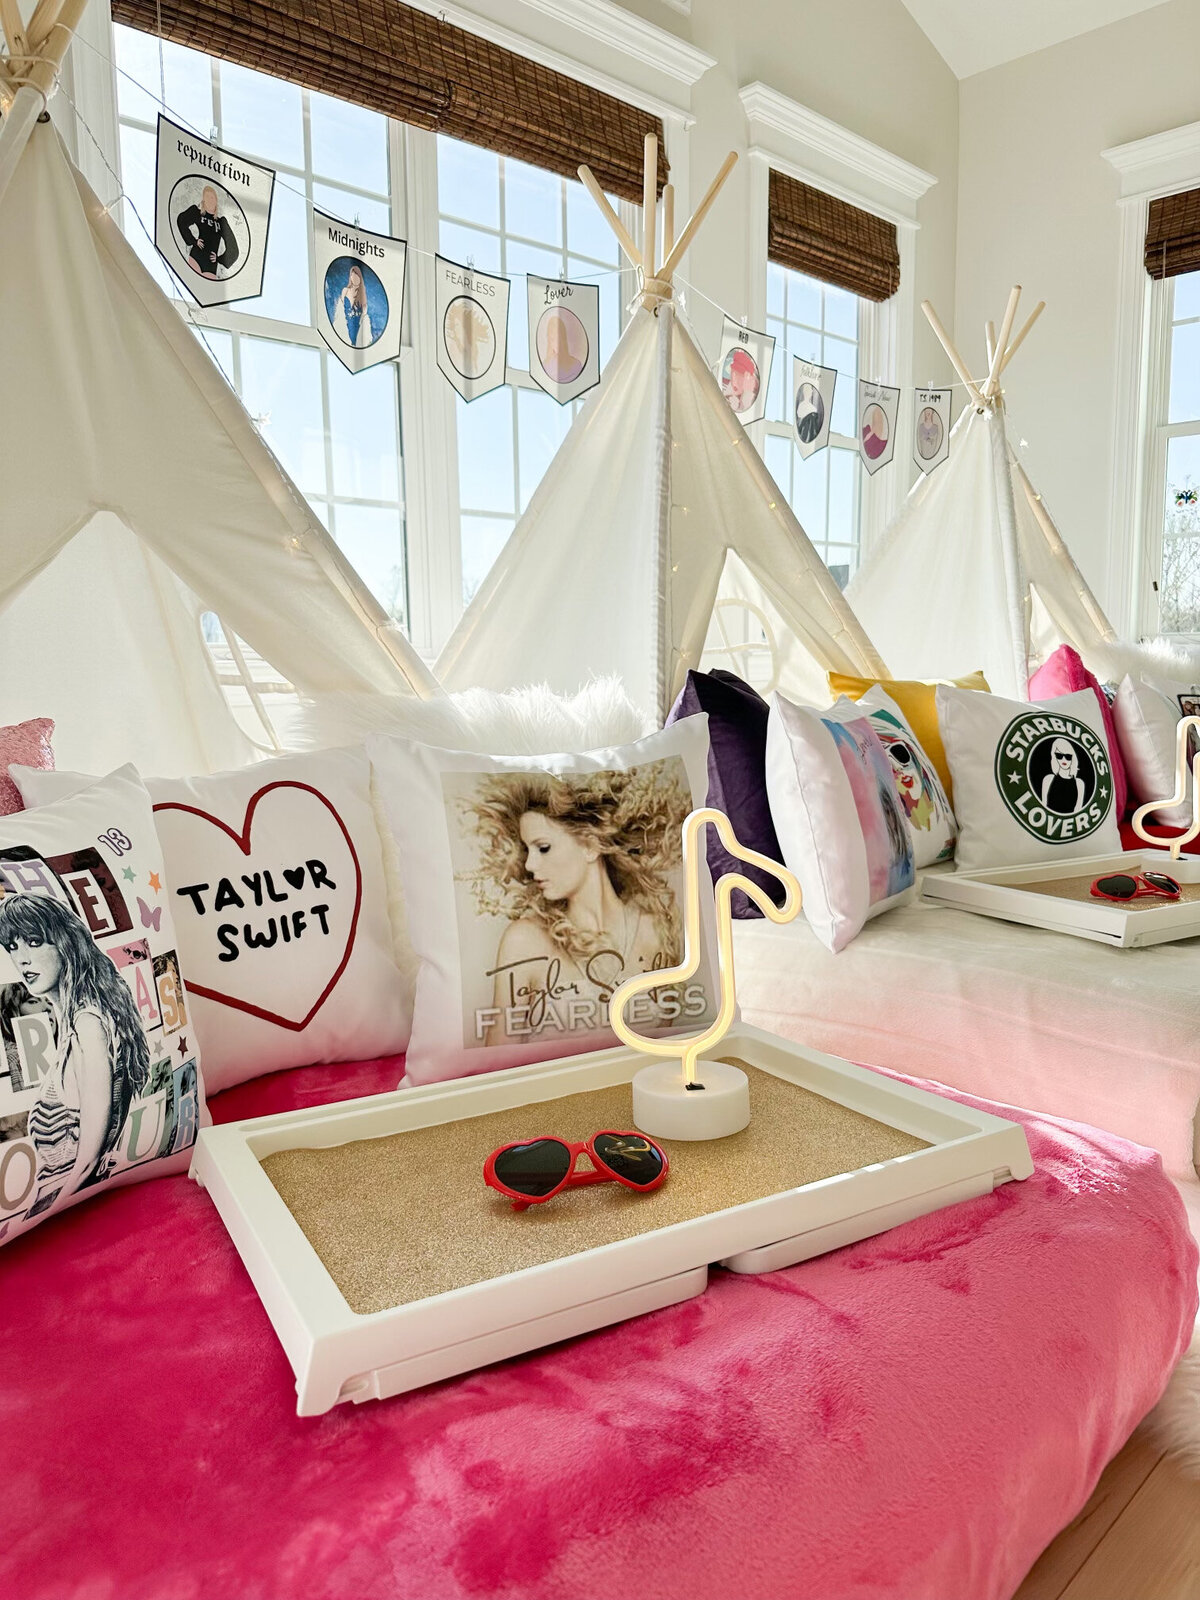 teepee beds with taylor swift pillows and props